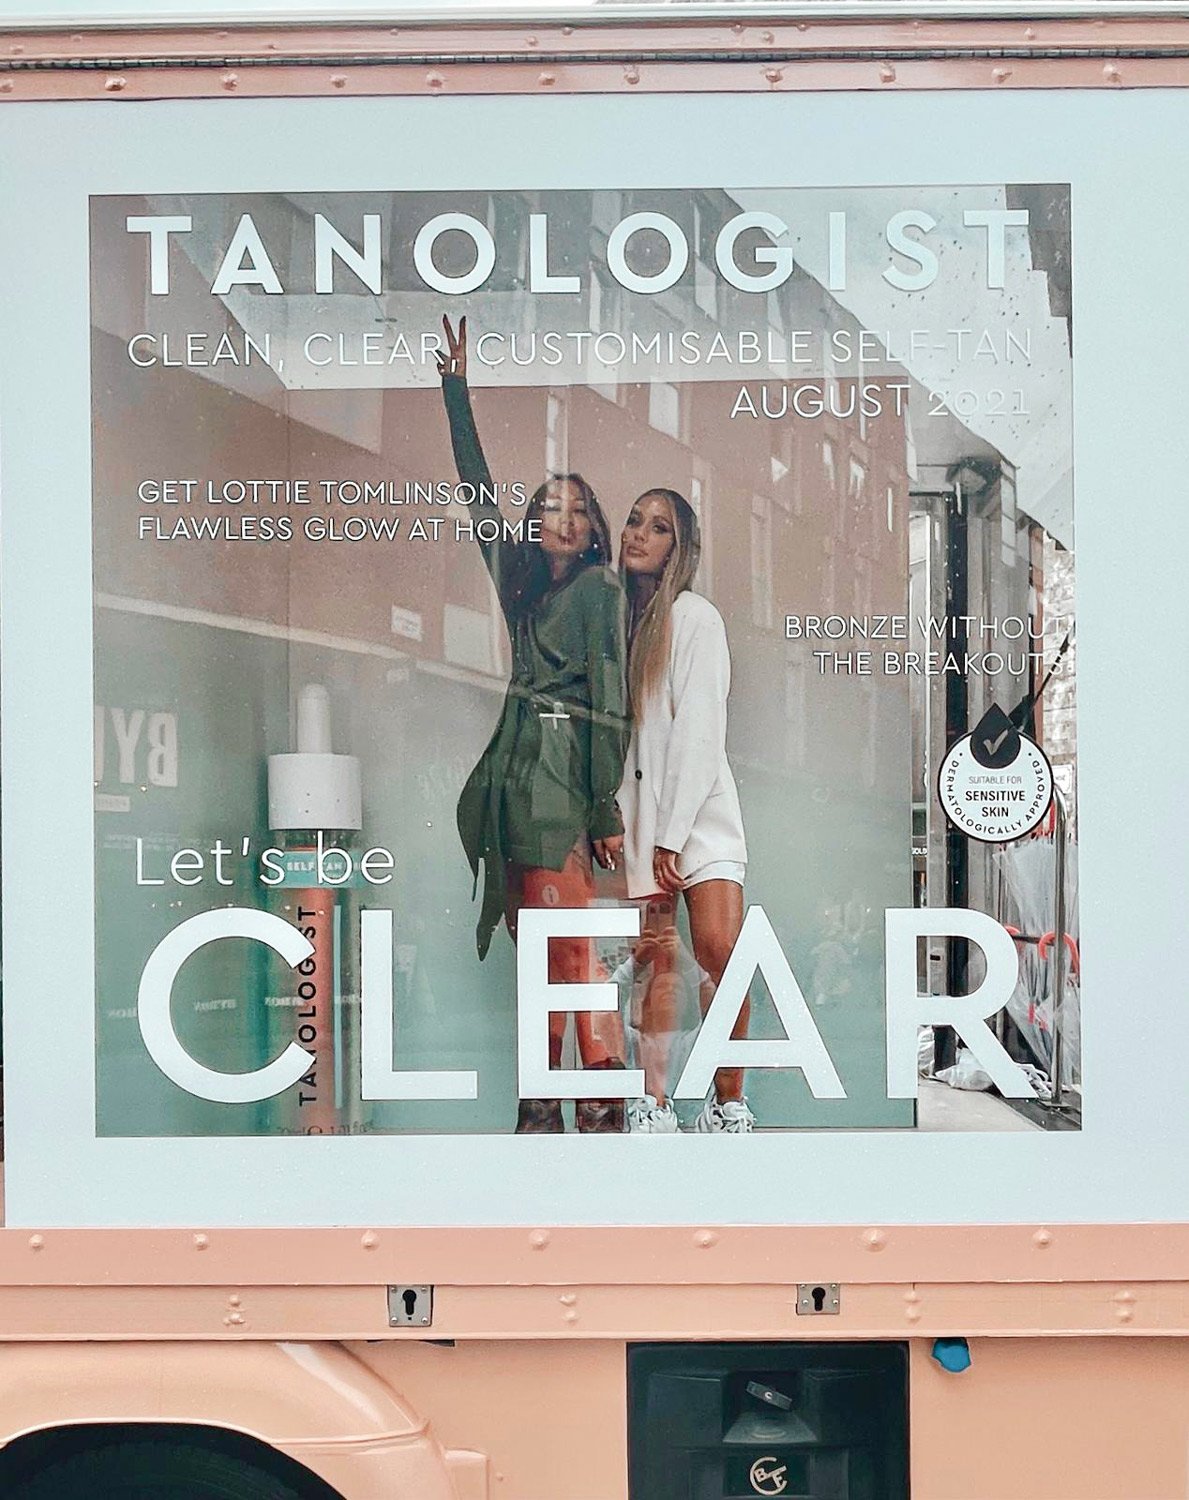 Tanologist - Let's be clear -  Retail Experience Agency